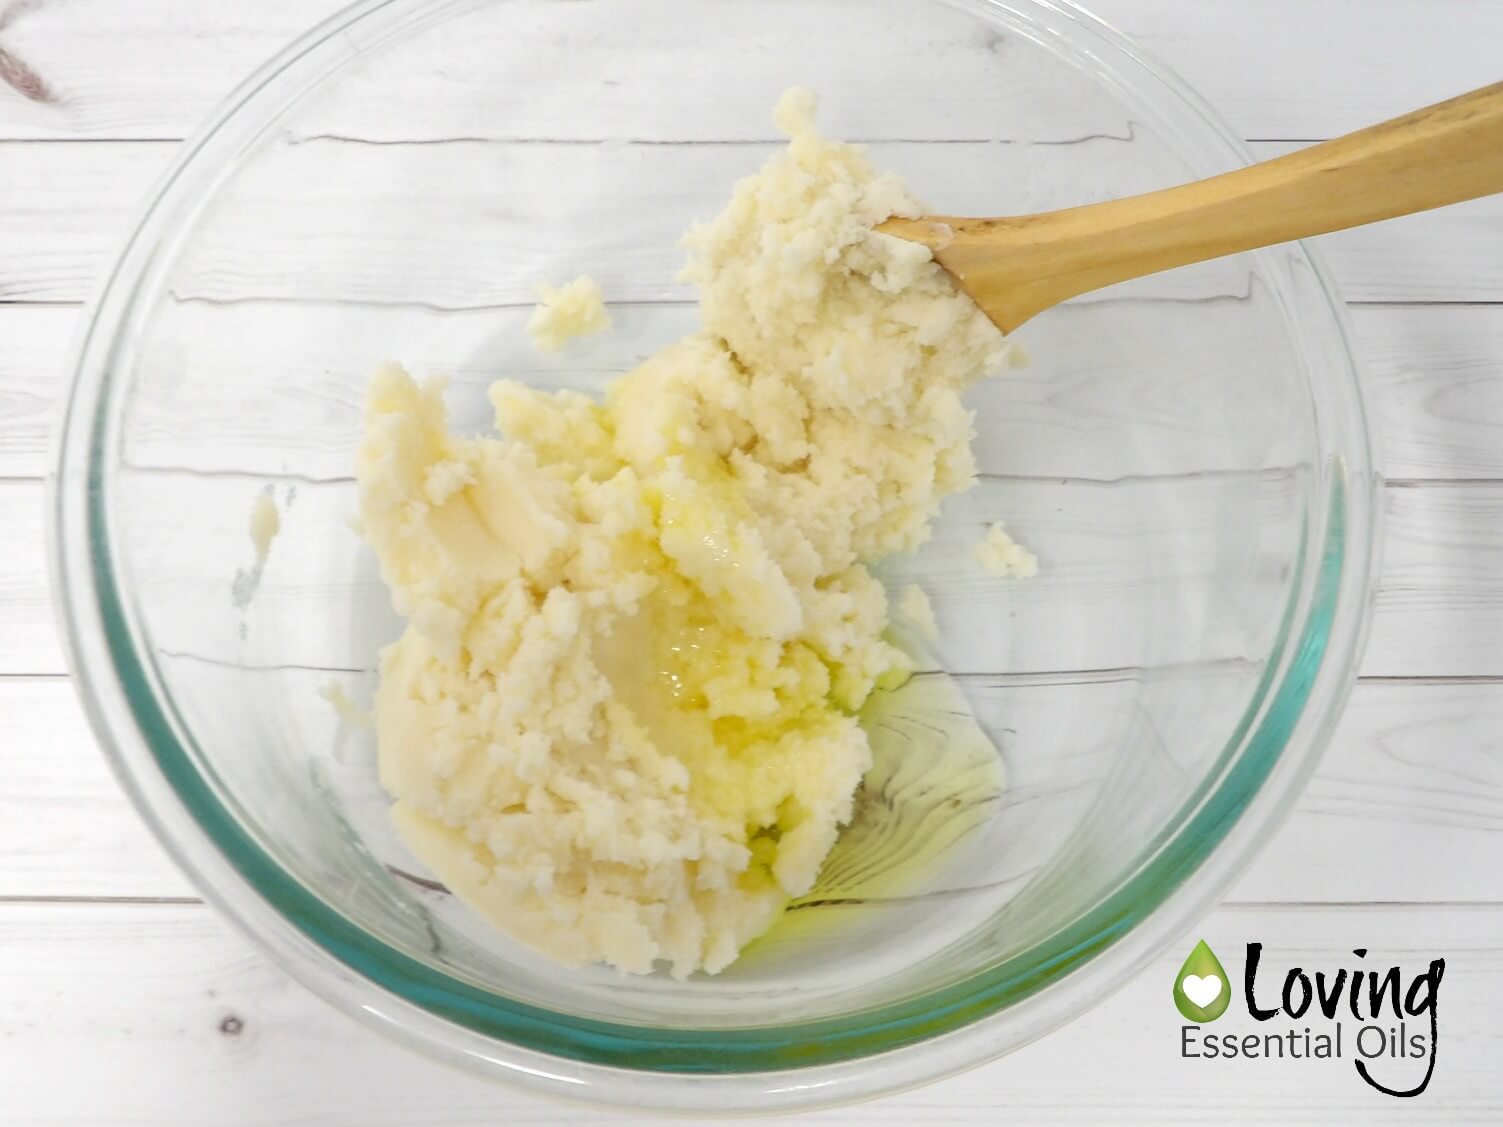 How to Make Whipped Shea Butter by Loving Essential Oils